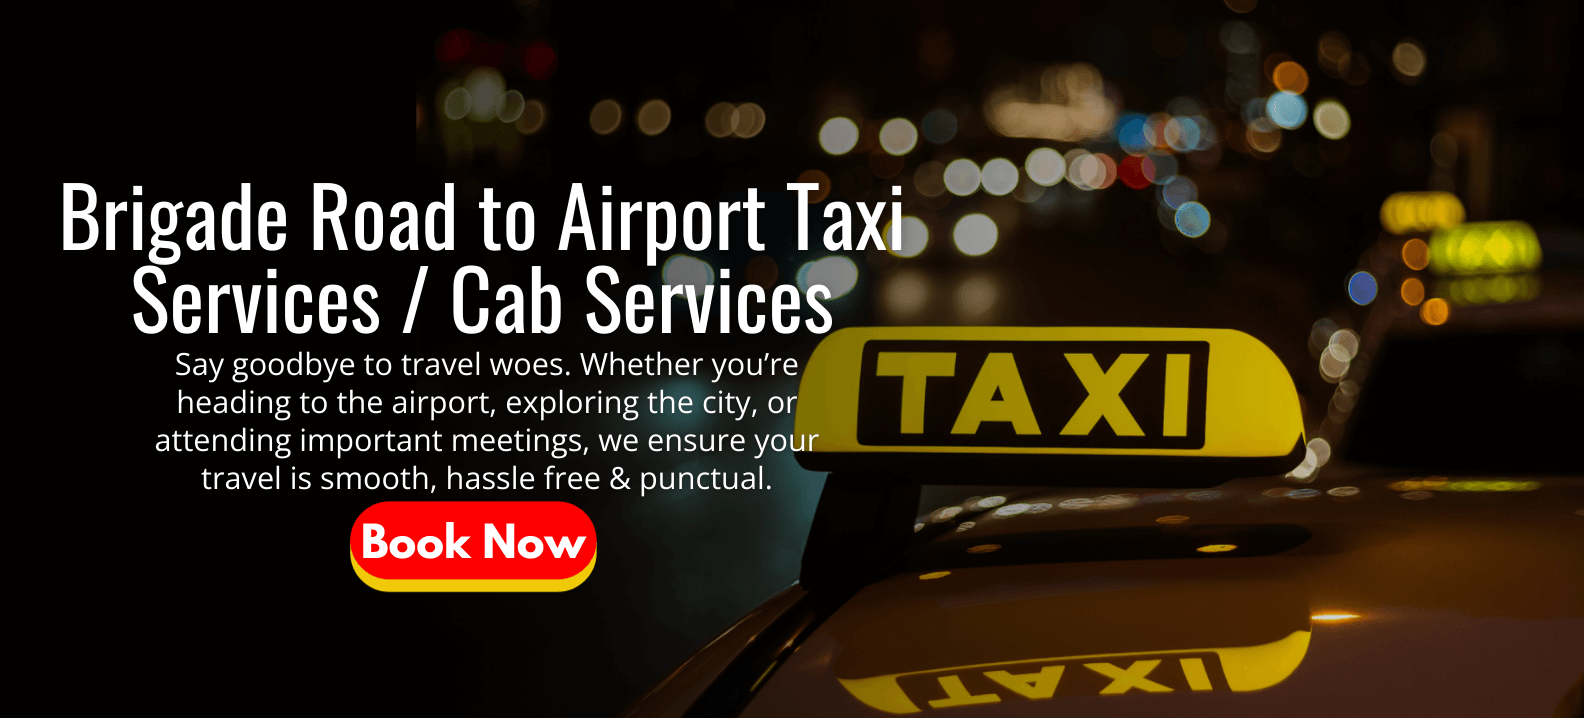 Brigade Road to Airport Taxi Services _ Cab Services